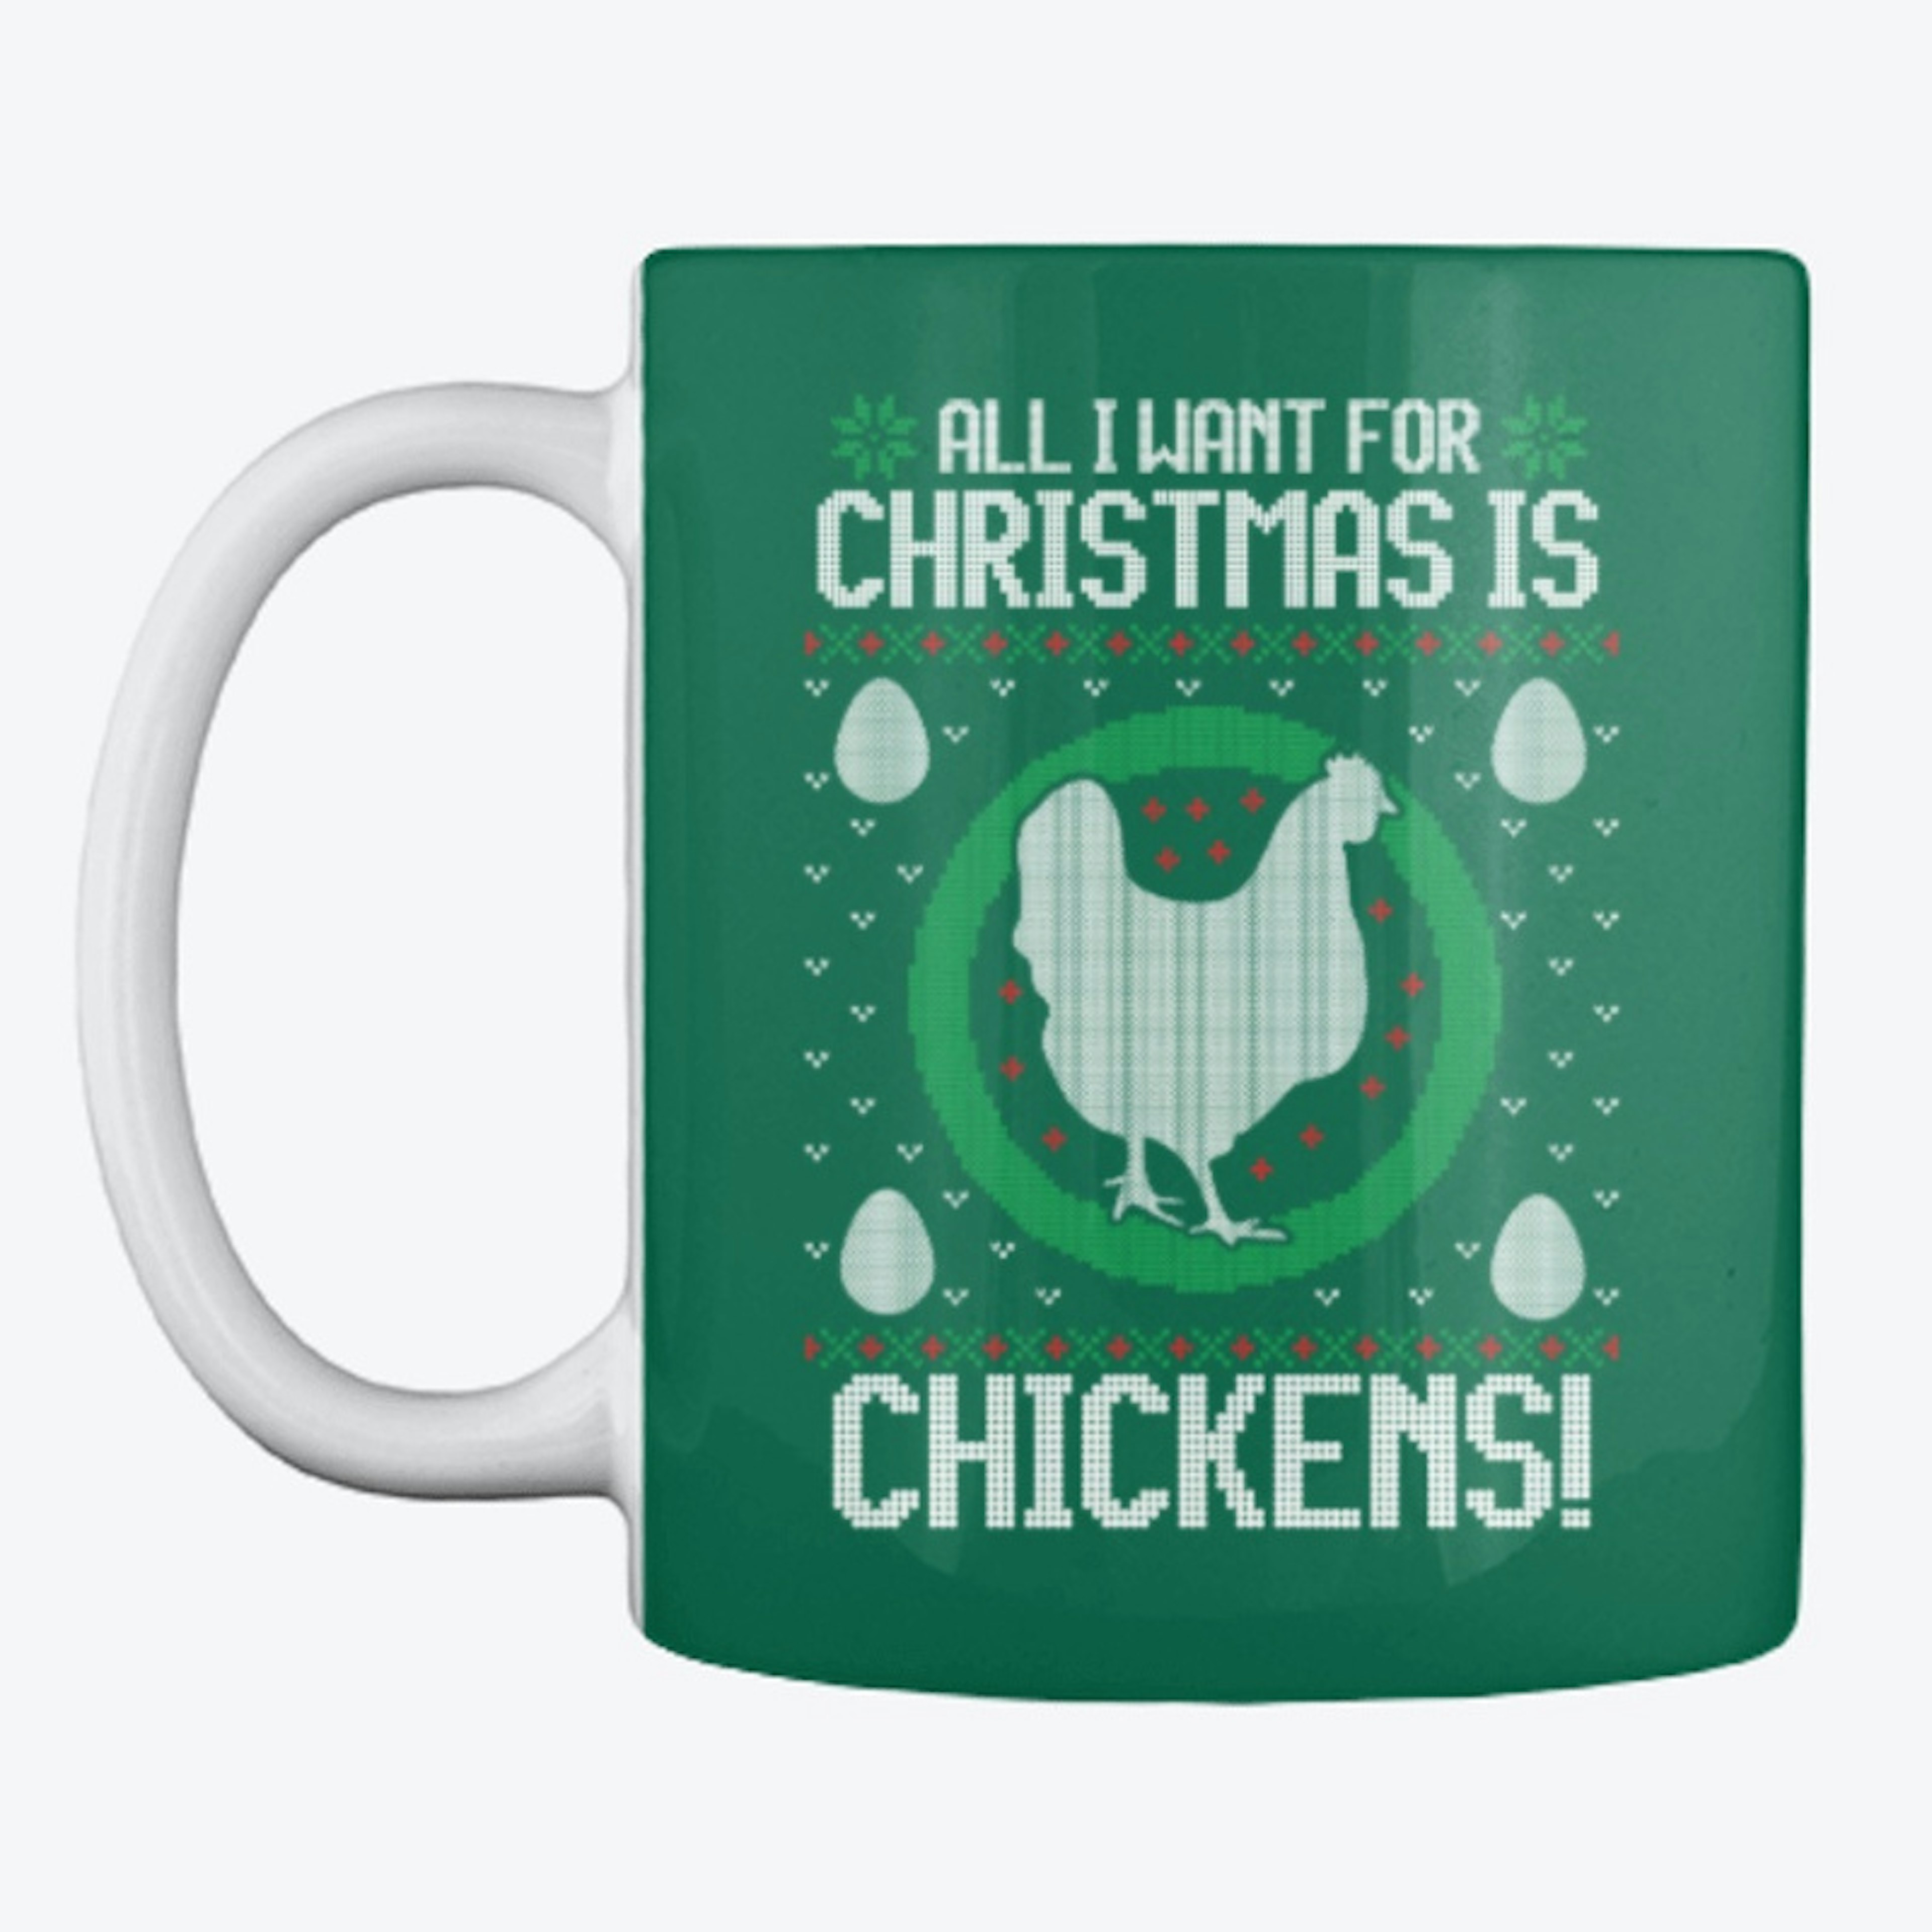 All I Want for Christmas is CHICKENS!